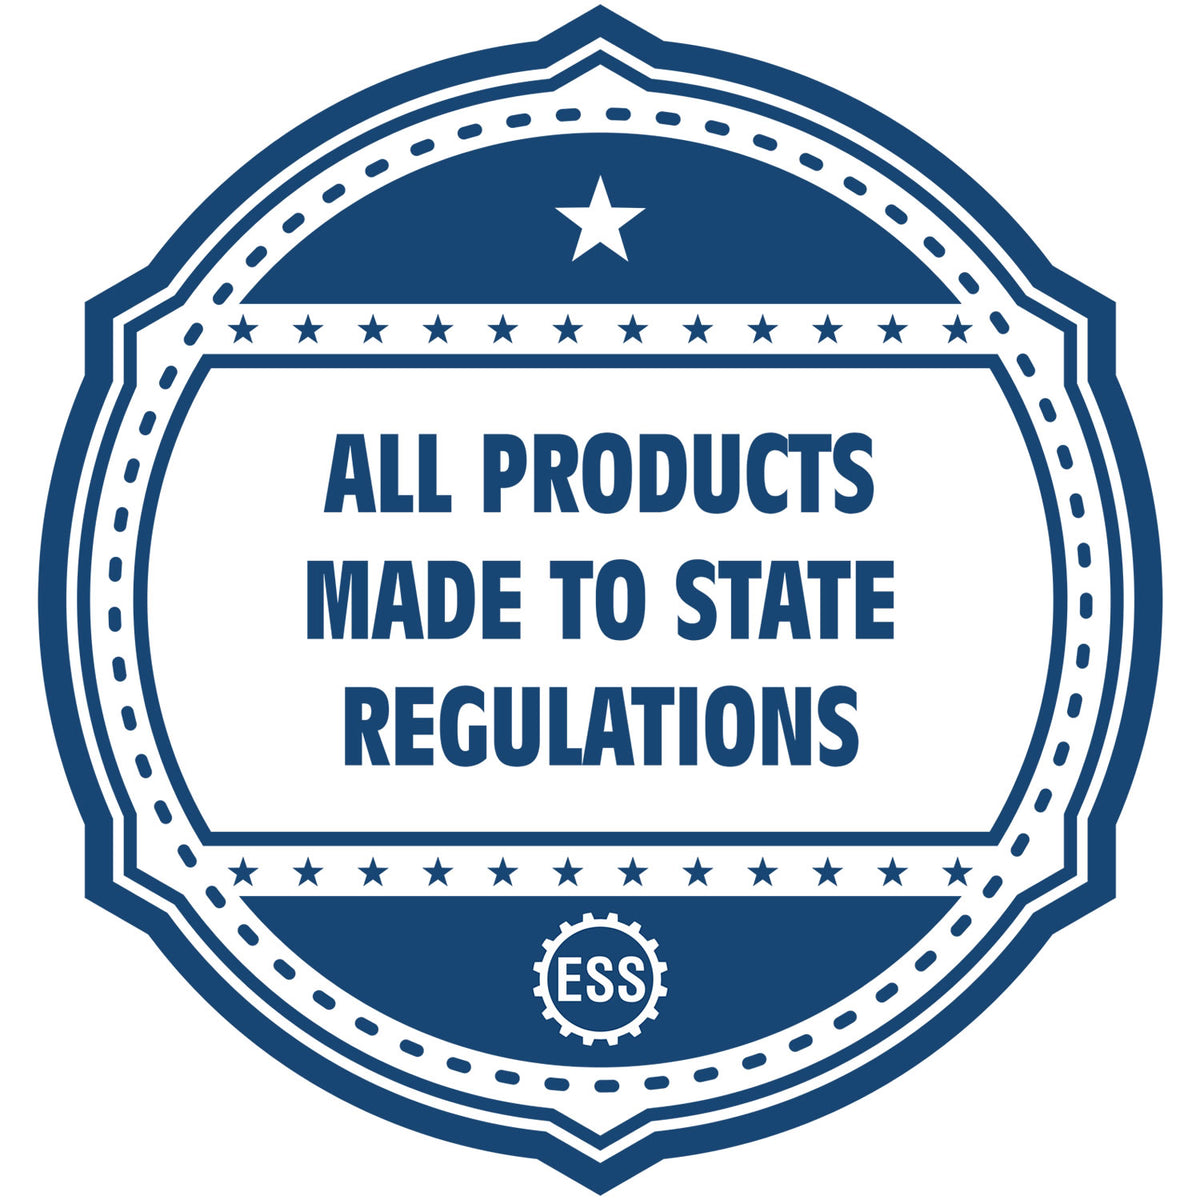 An icon or badge element for the Alaska Desk Architect Embossing Seal showing that this product is made in compliance with state regulations.